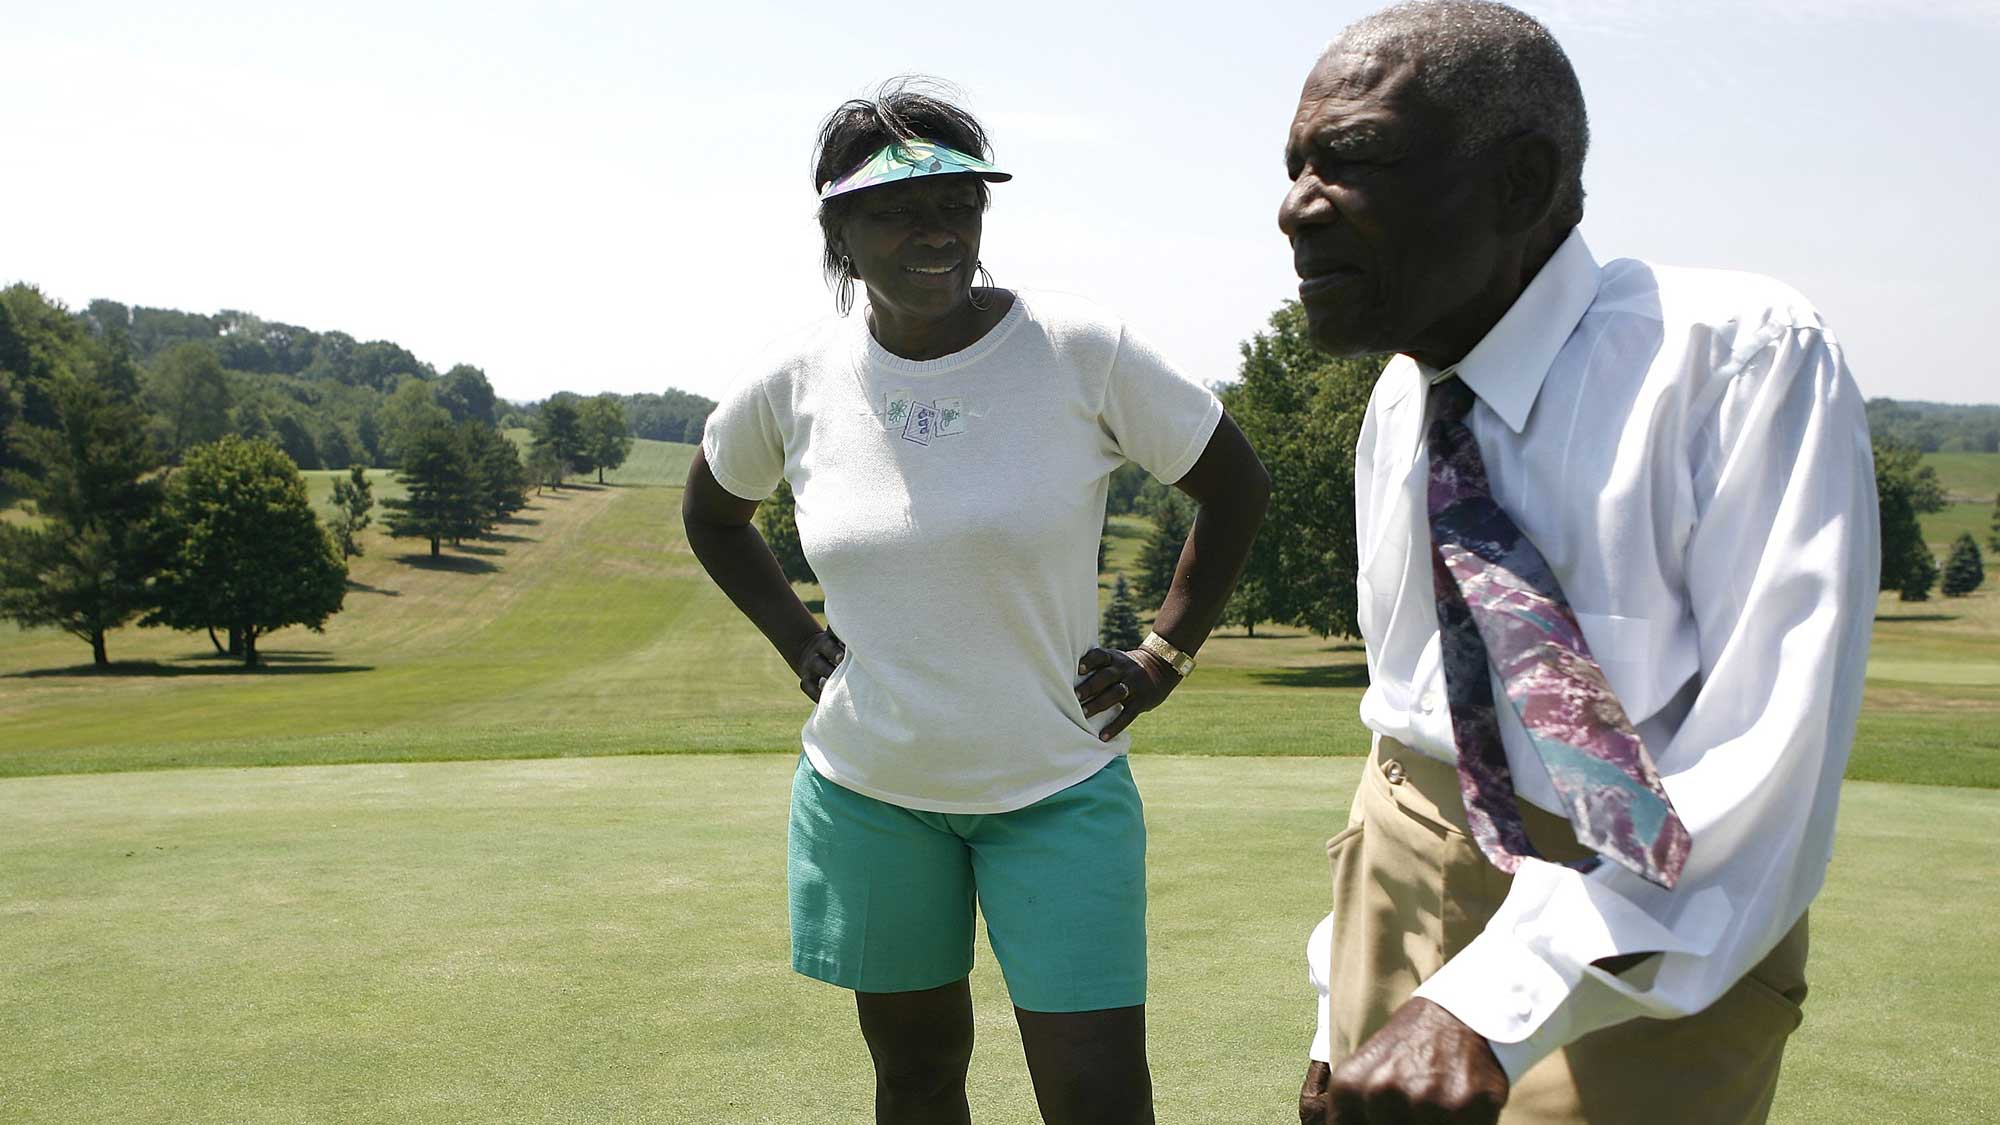 Bill Powell and his daughter Renee Powell talk on a green at Clearview Golf Club on June 25, 2009 in East Canton, Ohio.